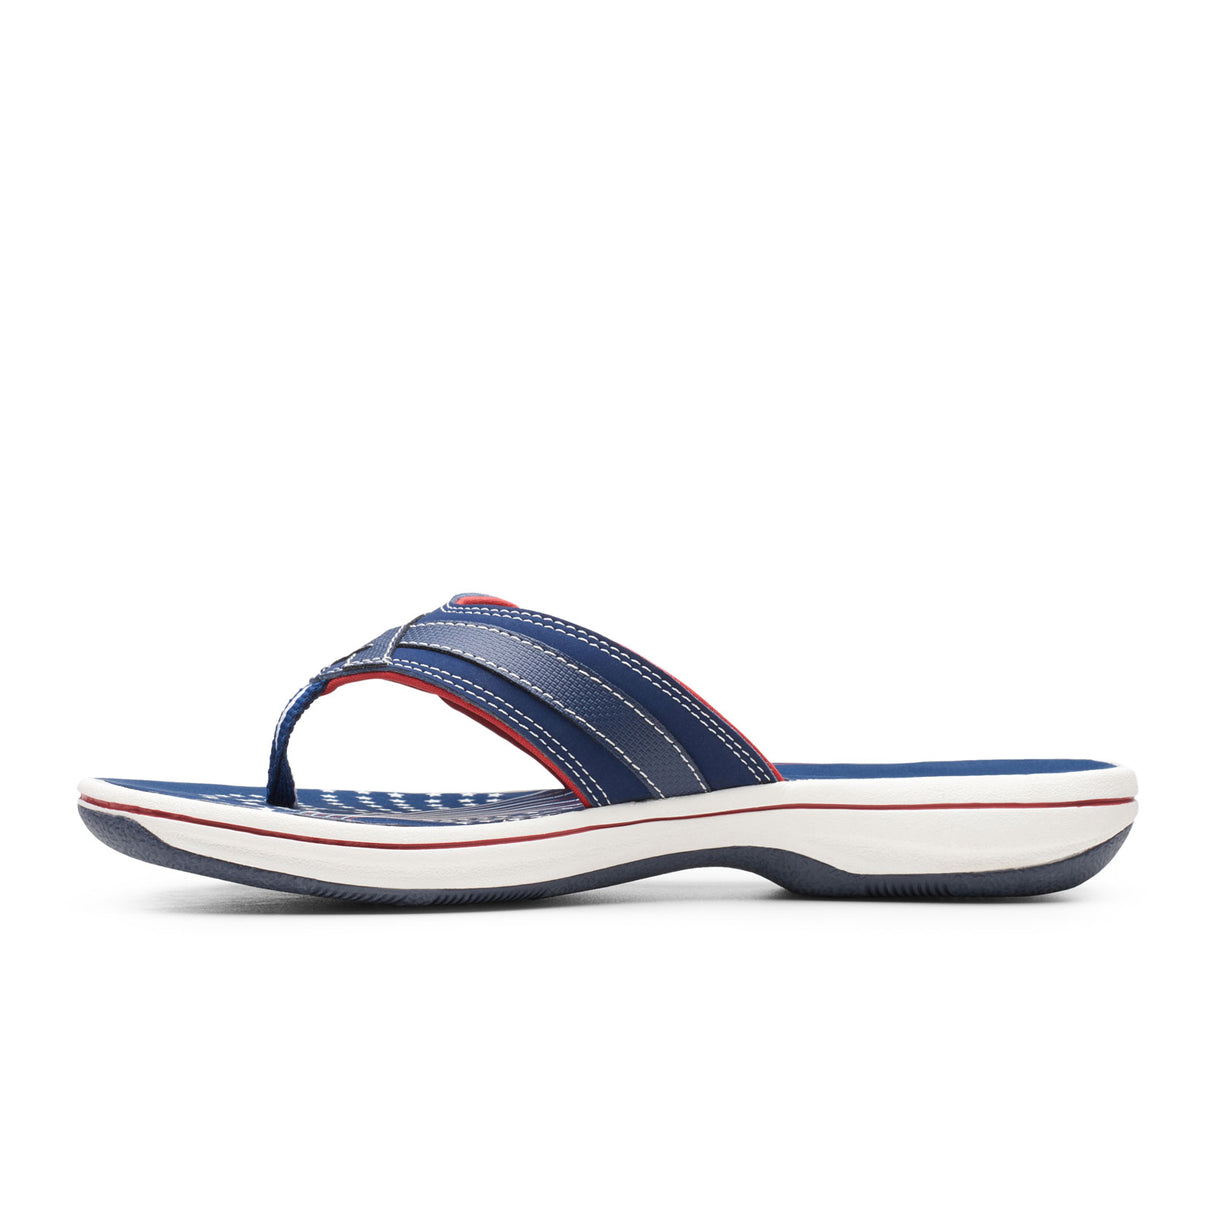 Clarks Breeze Sea H Thong Sandal (Women) - Navy/Red Synthetic Sandals - Thong - The Heel Shoe Fitters